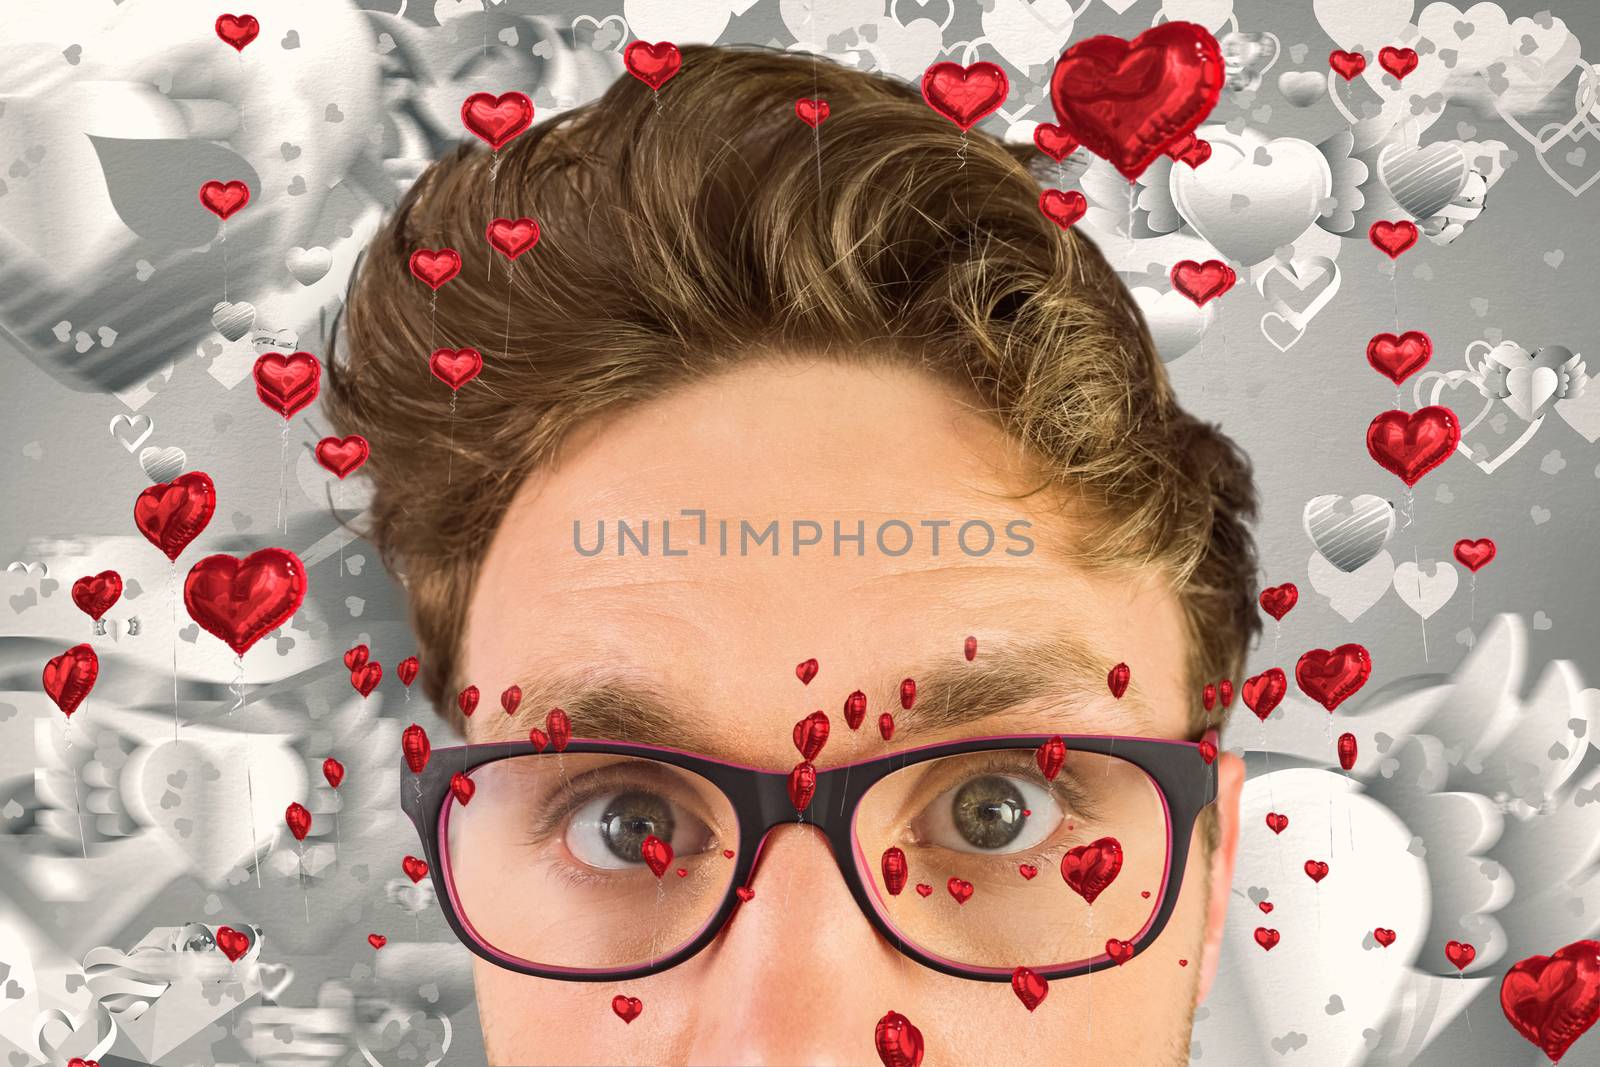 Geeky businessman looking at camera against grey valentines heart pattern